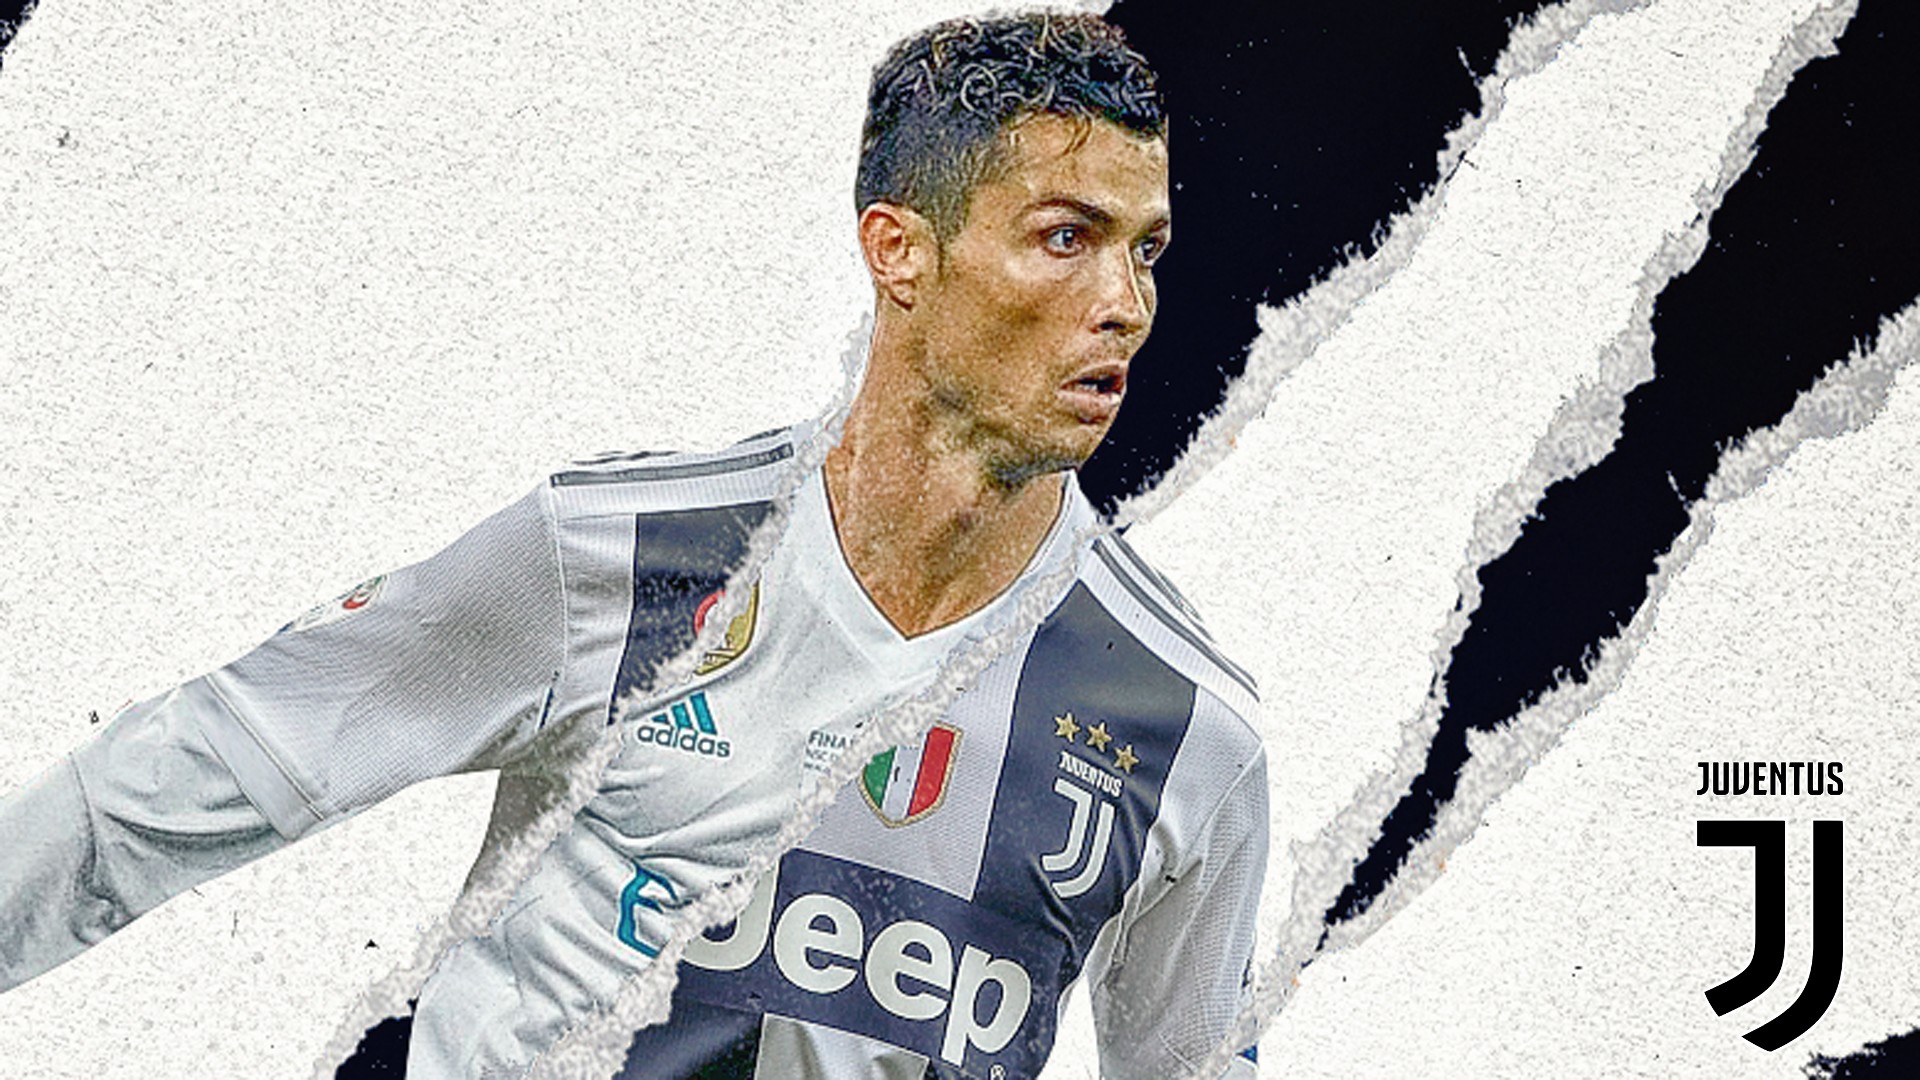 Cr7 Juventus Hd Wallpapers With Resolution Pixel - Desktop Cr7 Wallpaper Hd - HD Wallpaper 